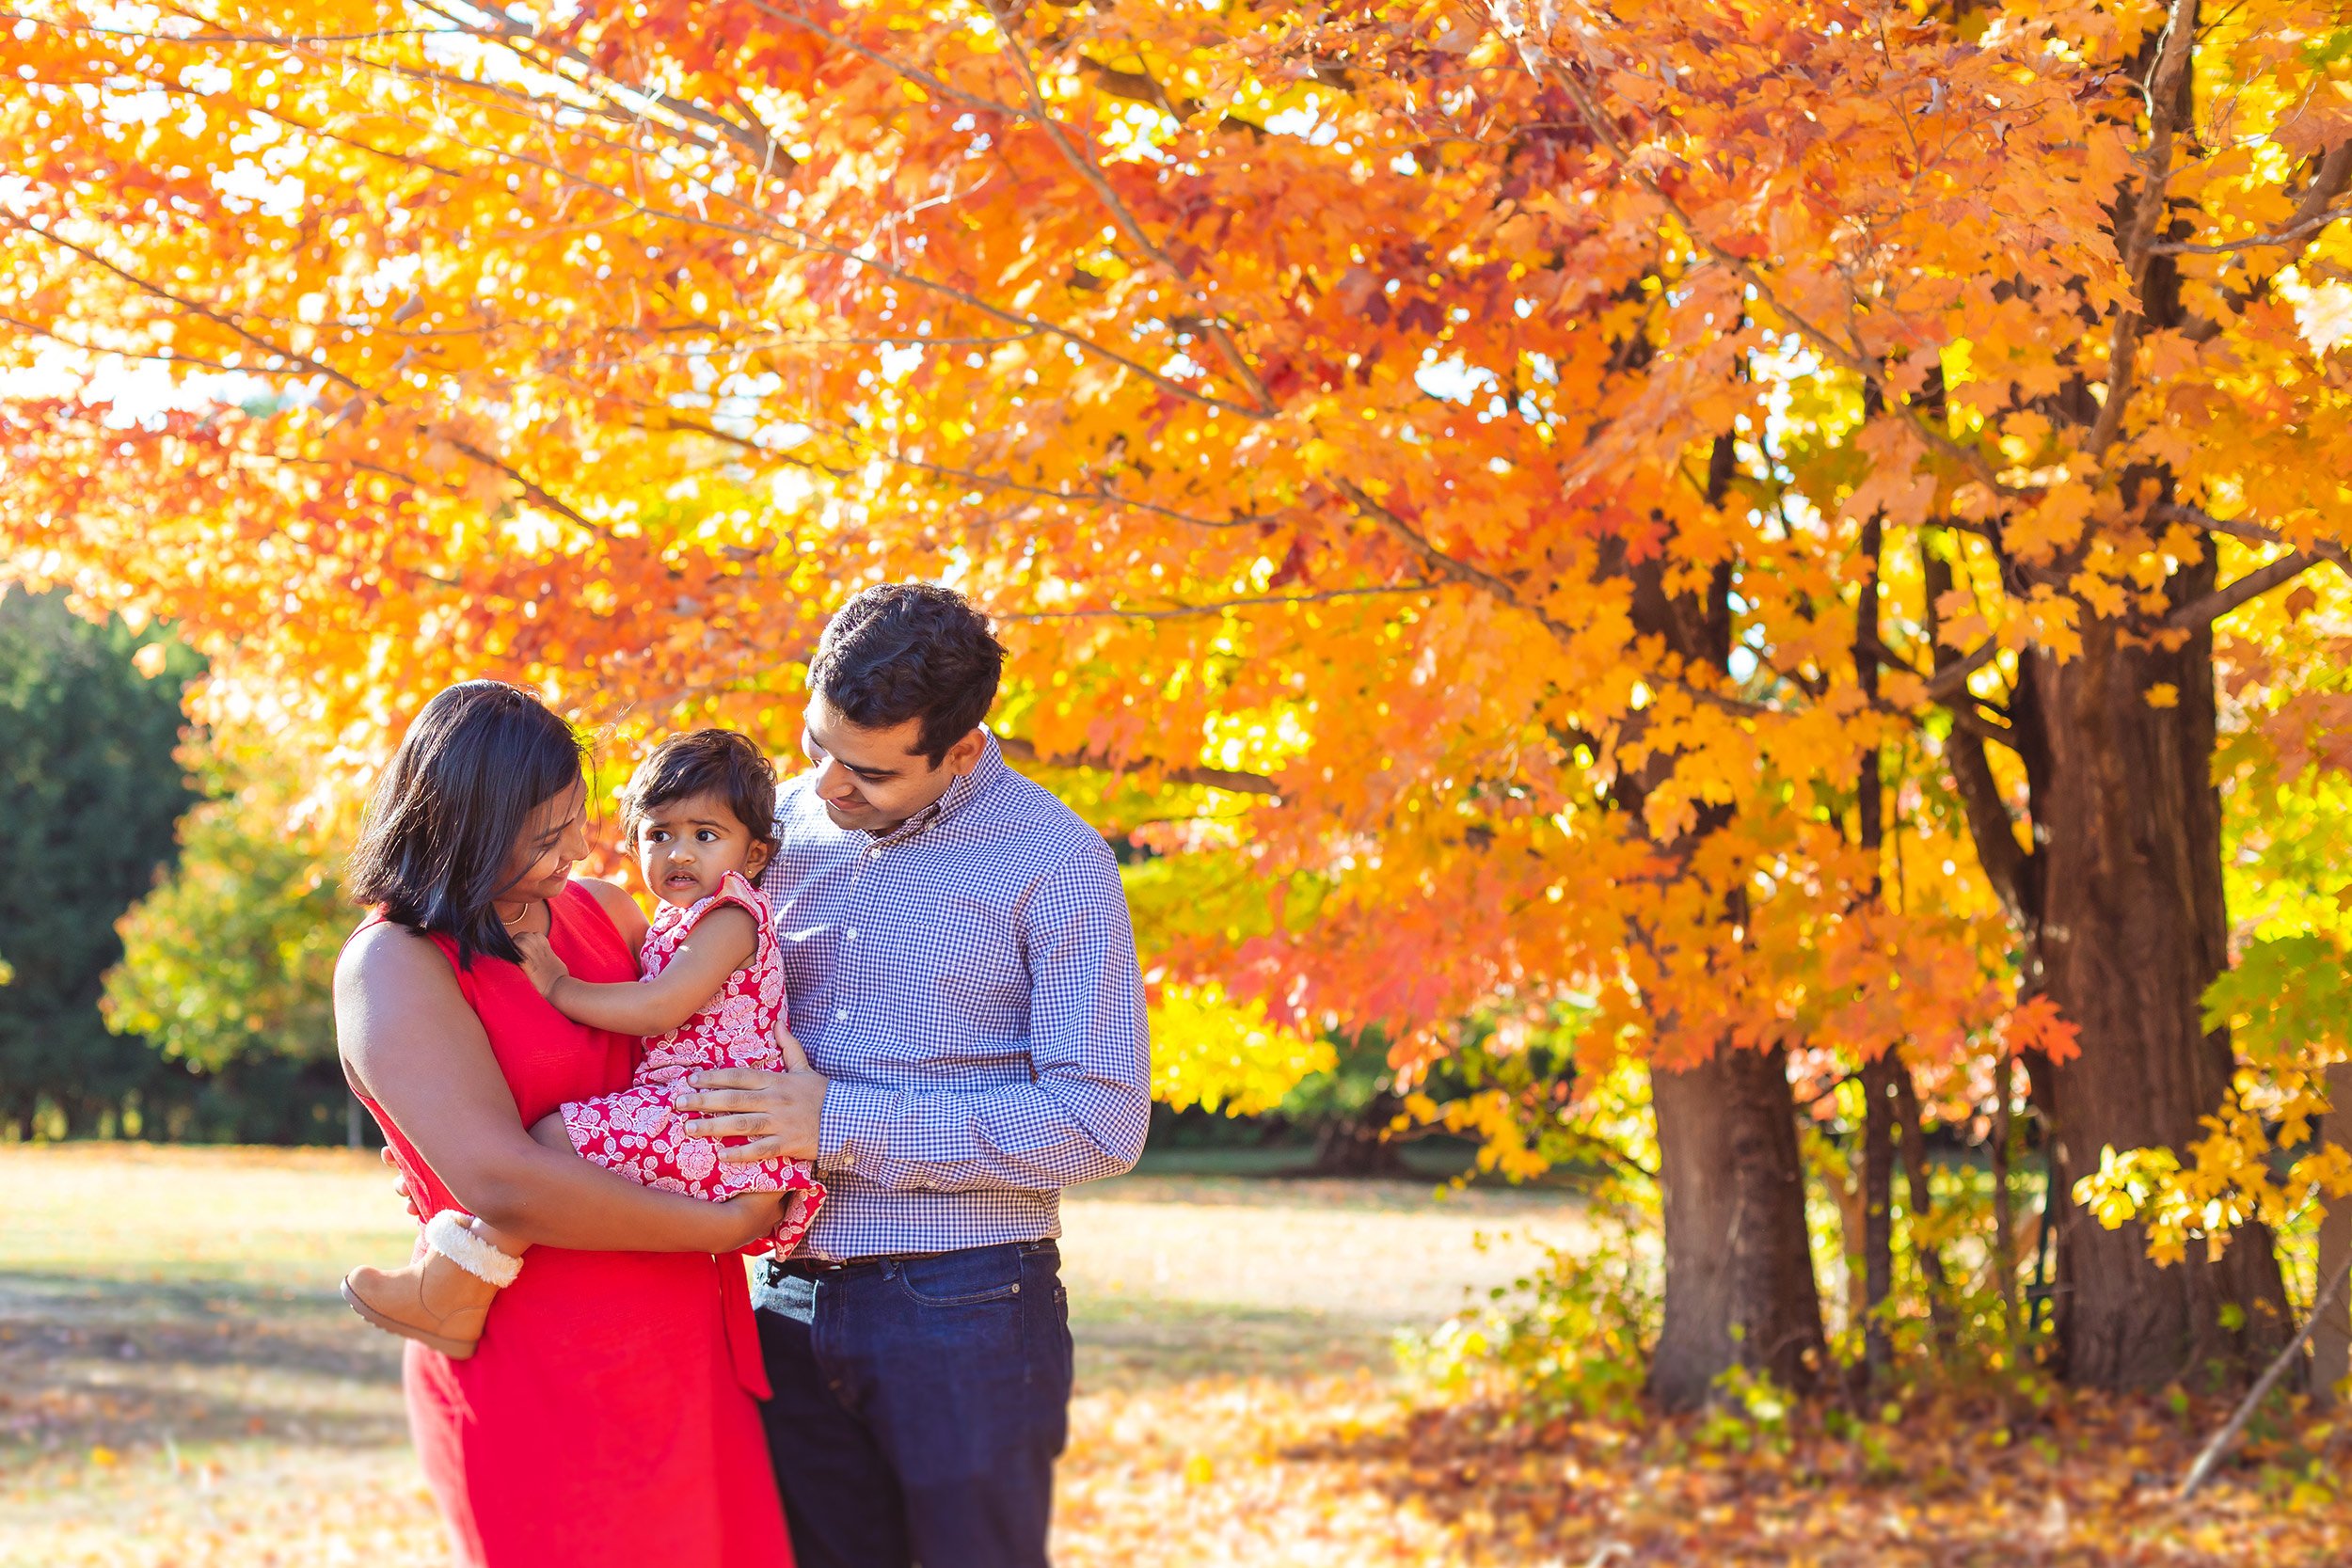 Andover MA  Family Portrait | Stephen Grant Photography